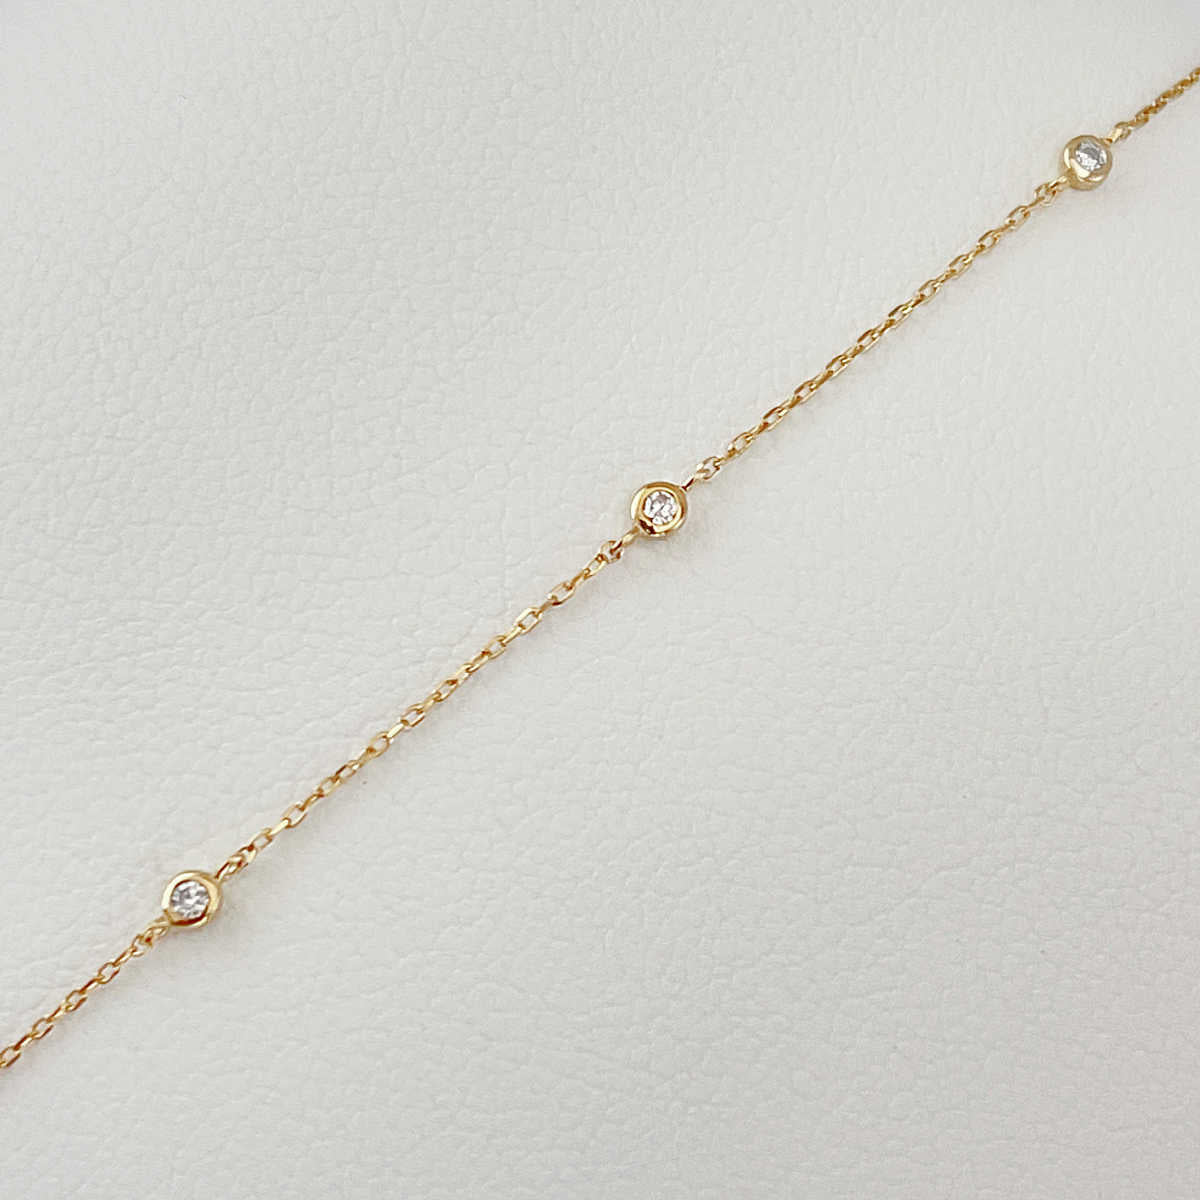 Diamond Station Necklace for Medical Alert Charm | Diamonds by the Yard Style Dainty Gold Necklace